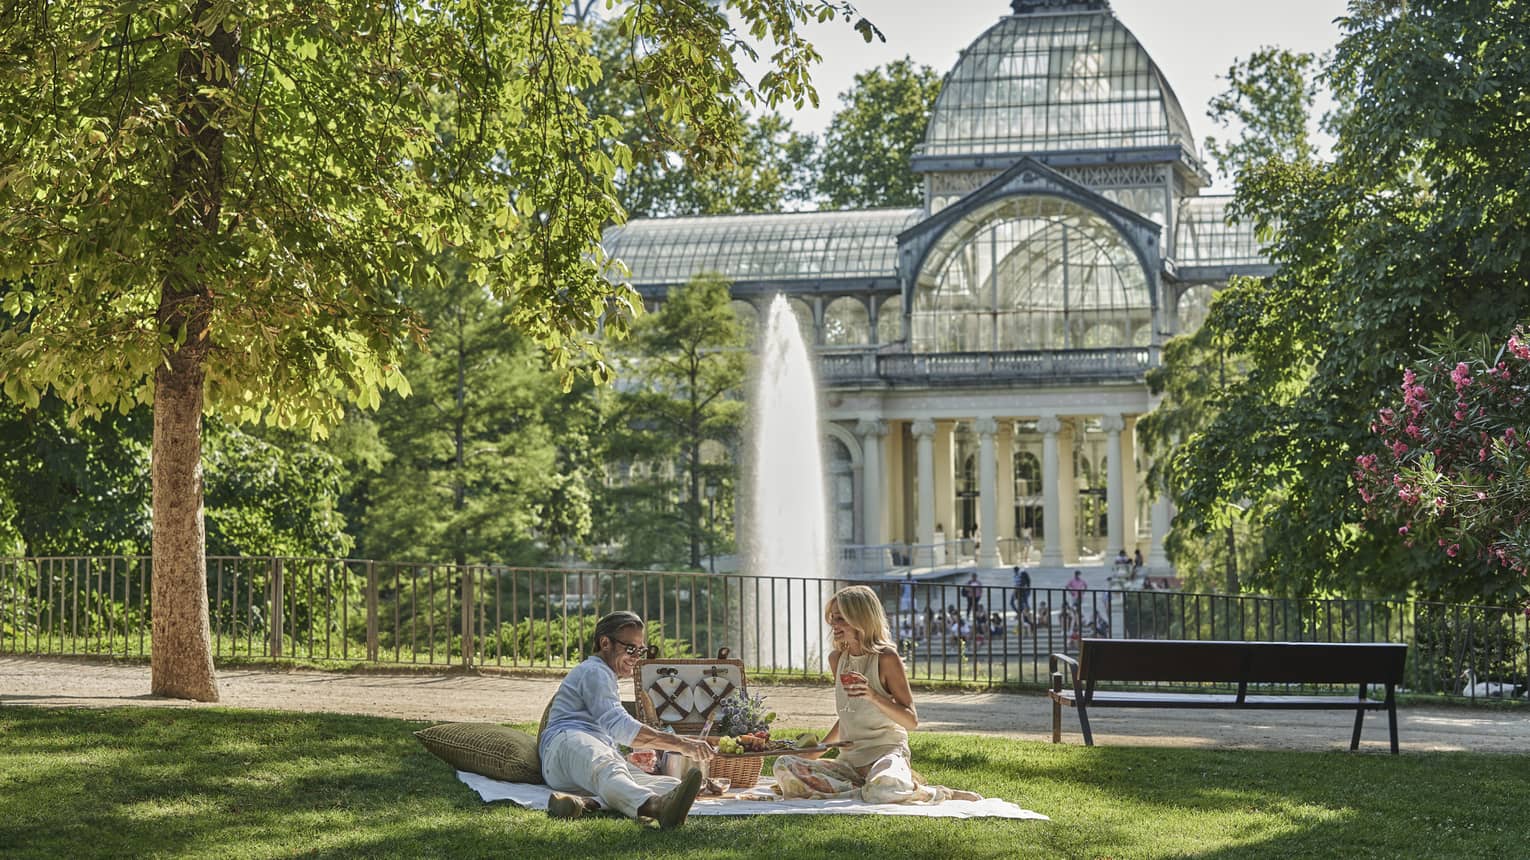 Couple on blanket on grass in Retiro Park, having picnic by park bench and near fountain